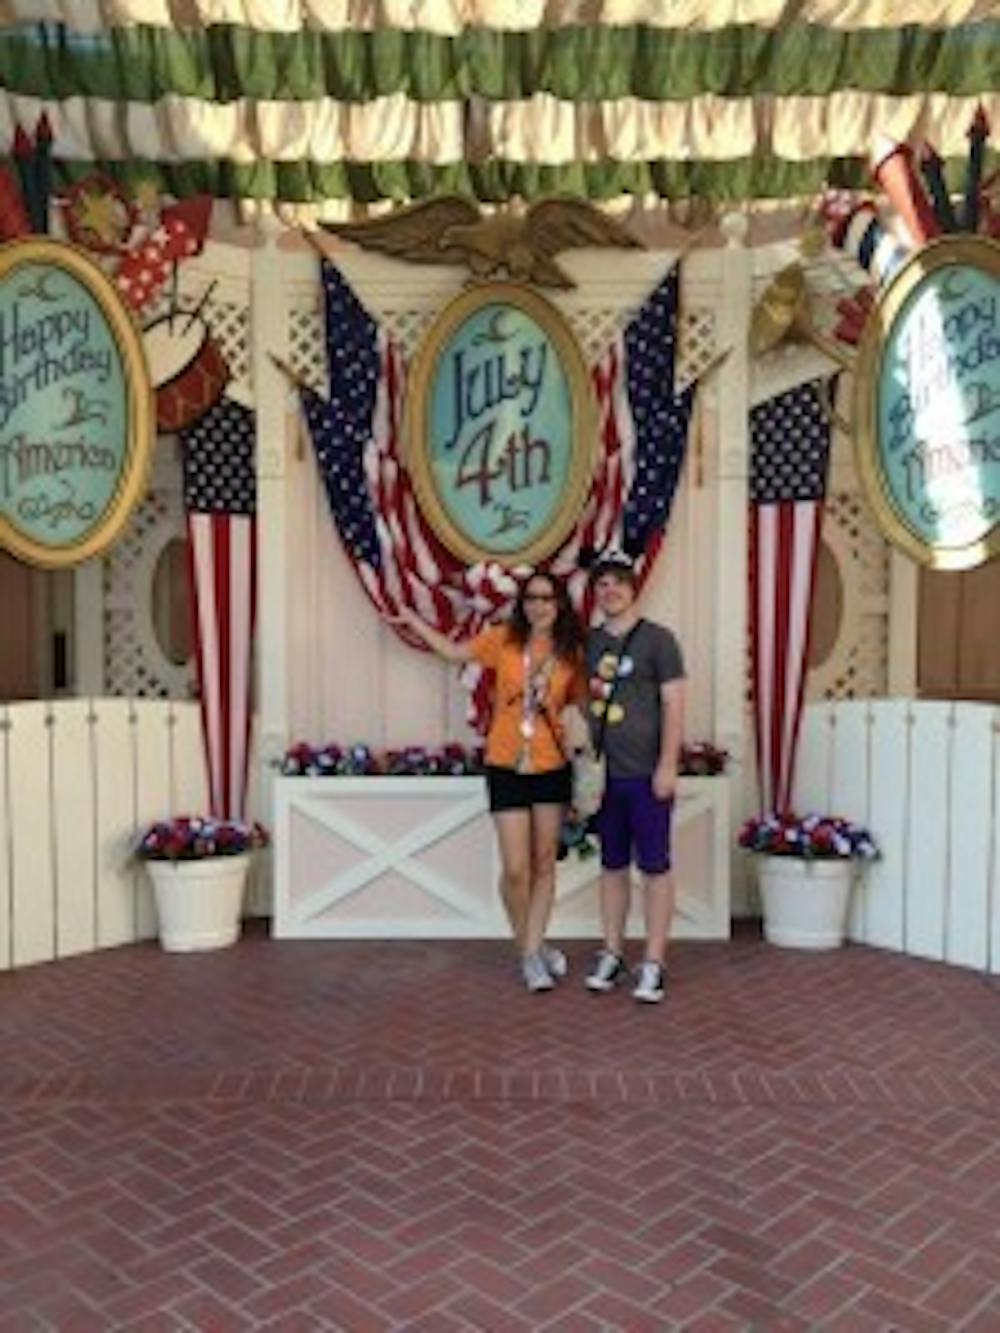 Tom and Holly celebrated the Fourth of July at Disneyland this year!